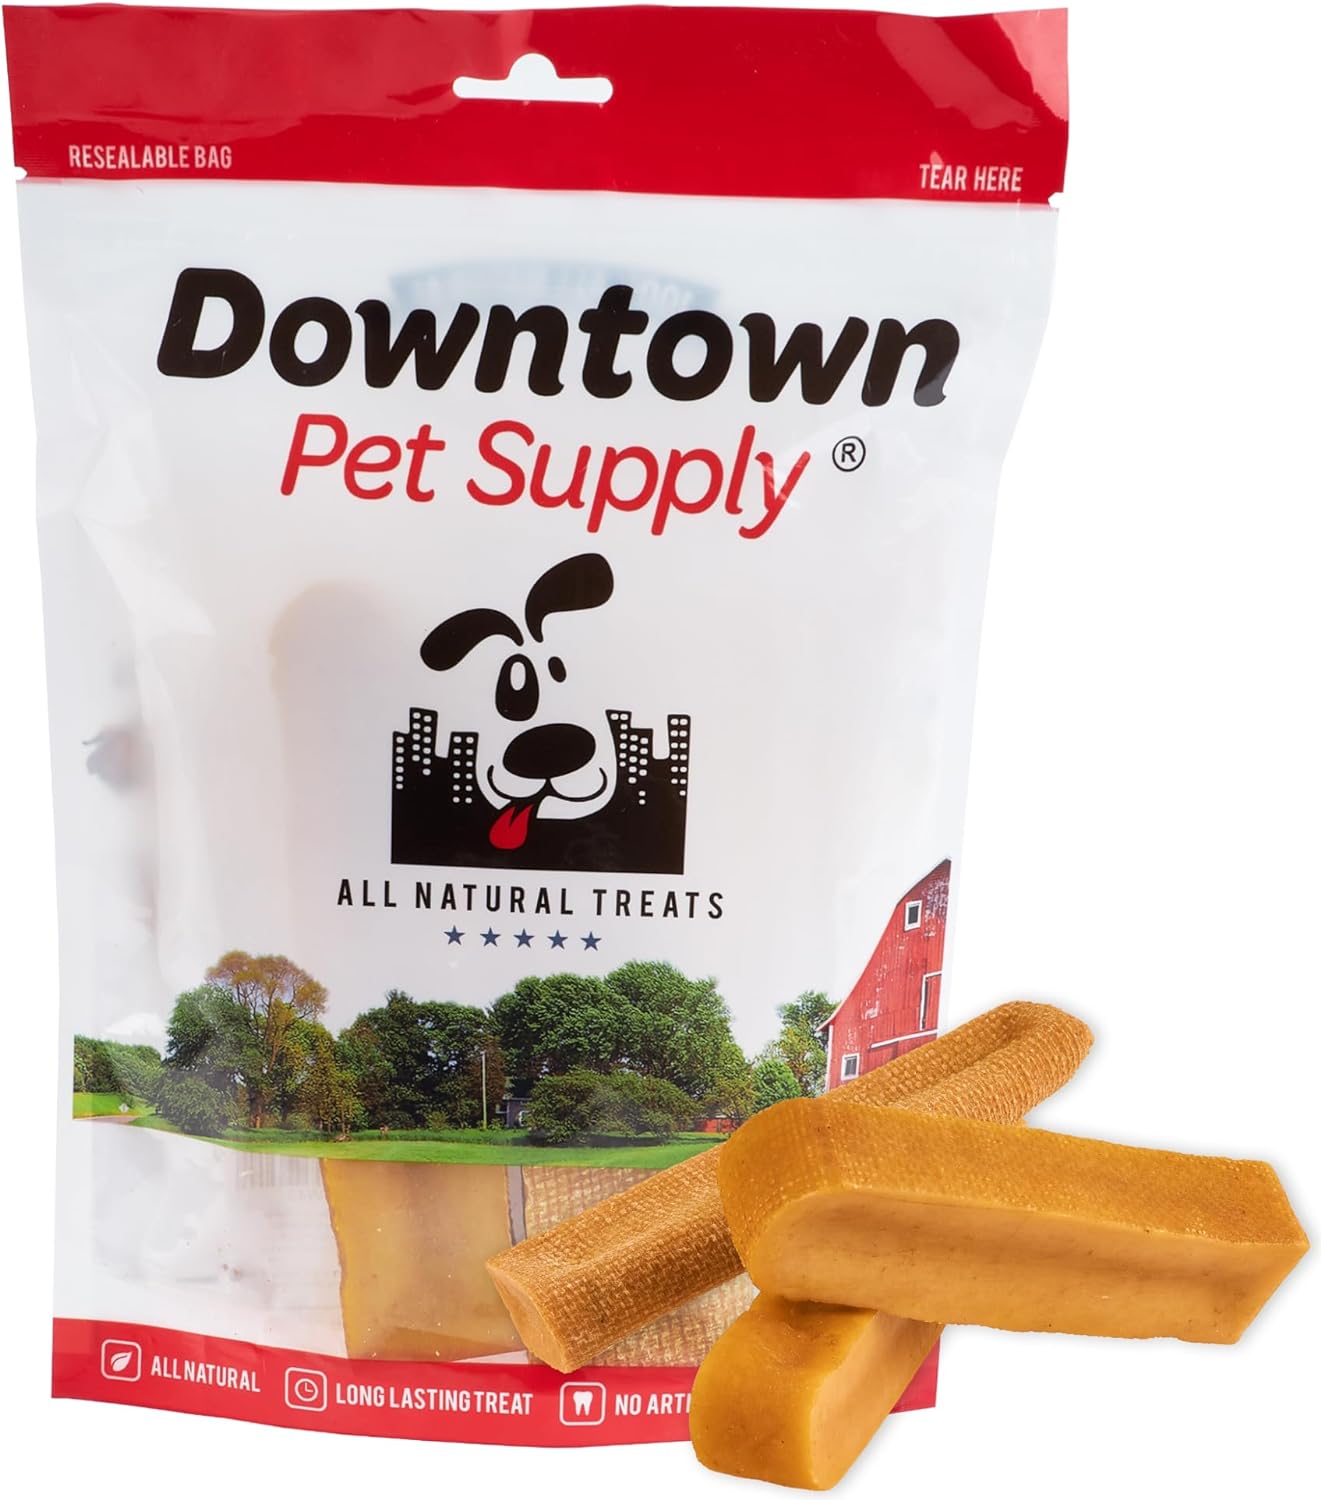 Downtown Pet Supply Yak Cheese Himalayan Dog Chews (10 lbs) - 100% Natural, 3 Ingredients, USA Packed - Protein & Calcium Rich Dog Treats for Small to Large Dogs - Long Lasting Rawhide Free Yak Chews